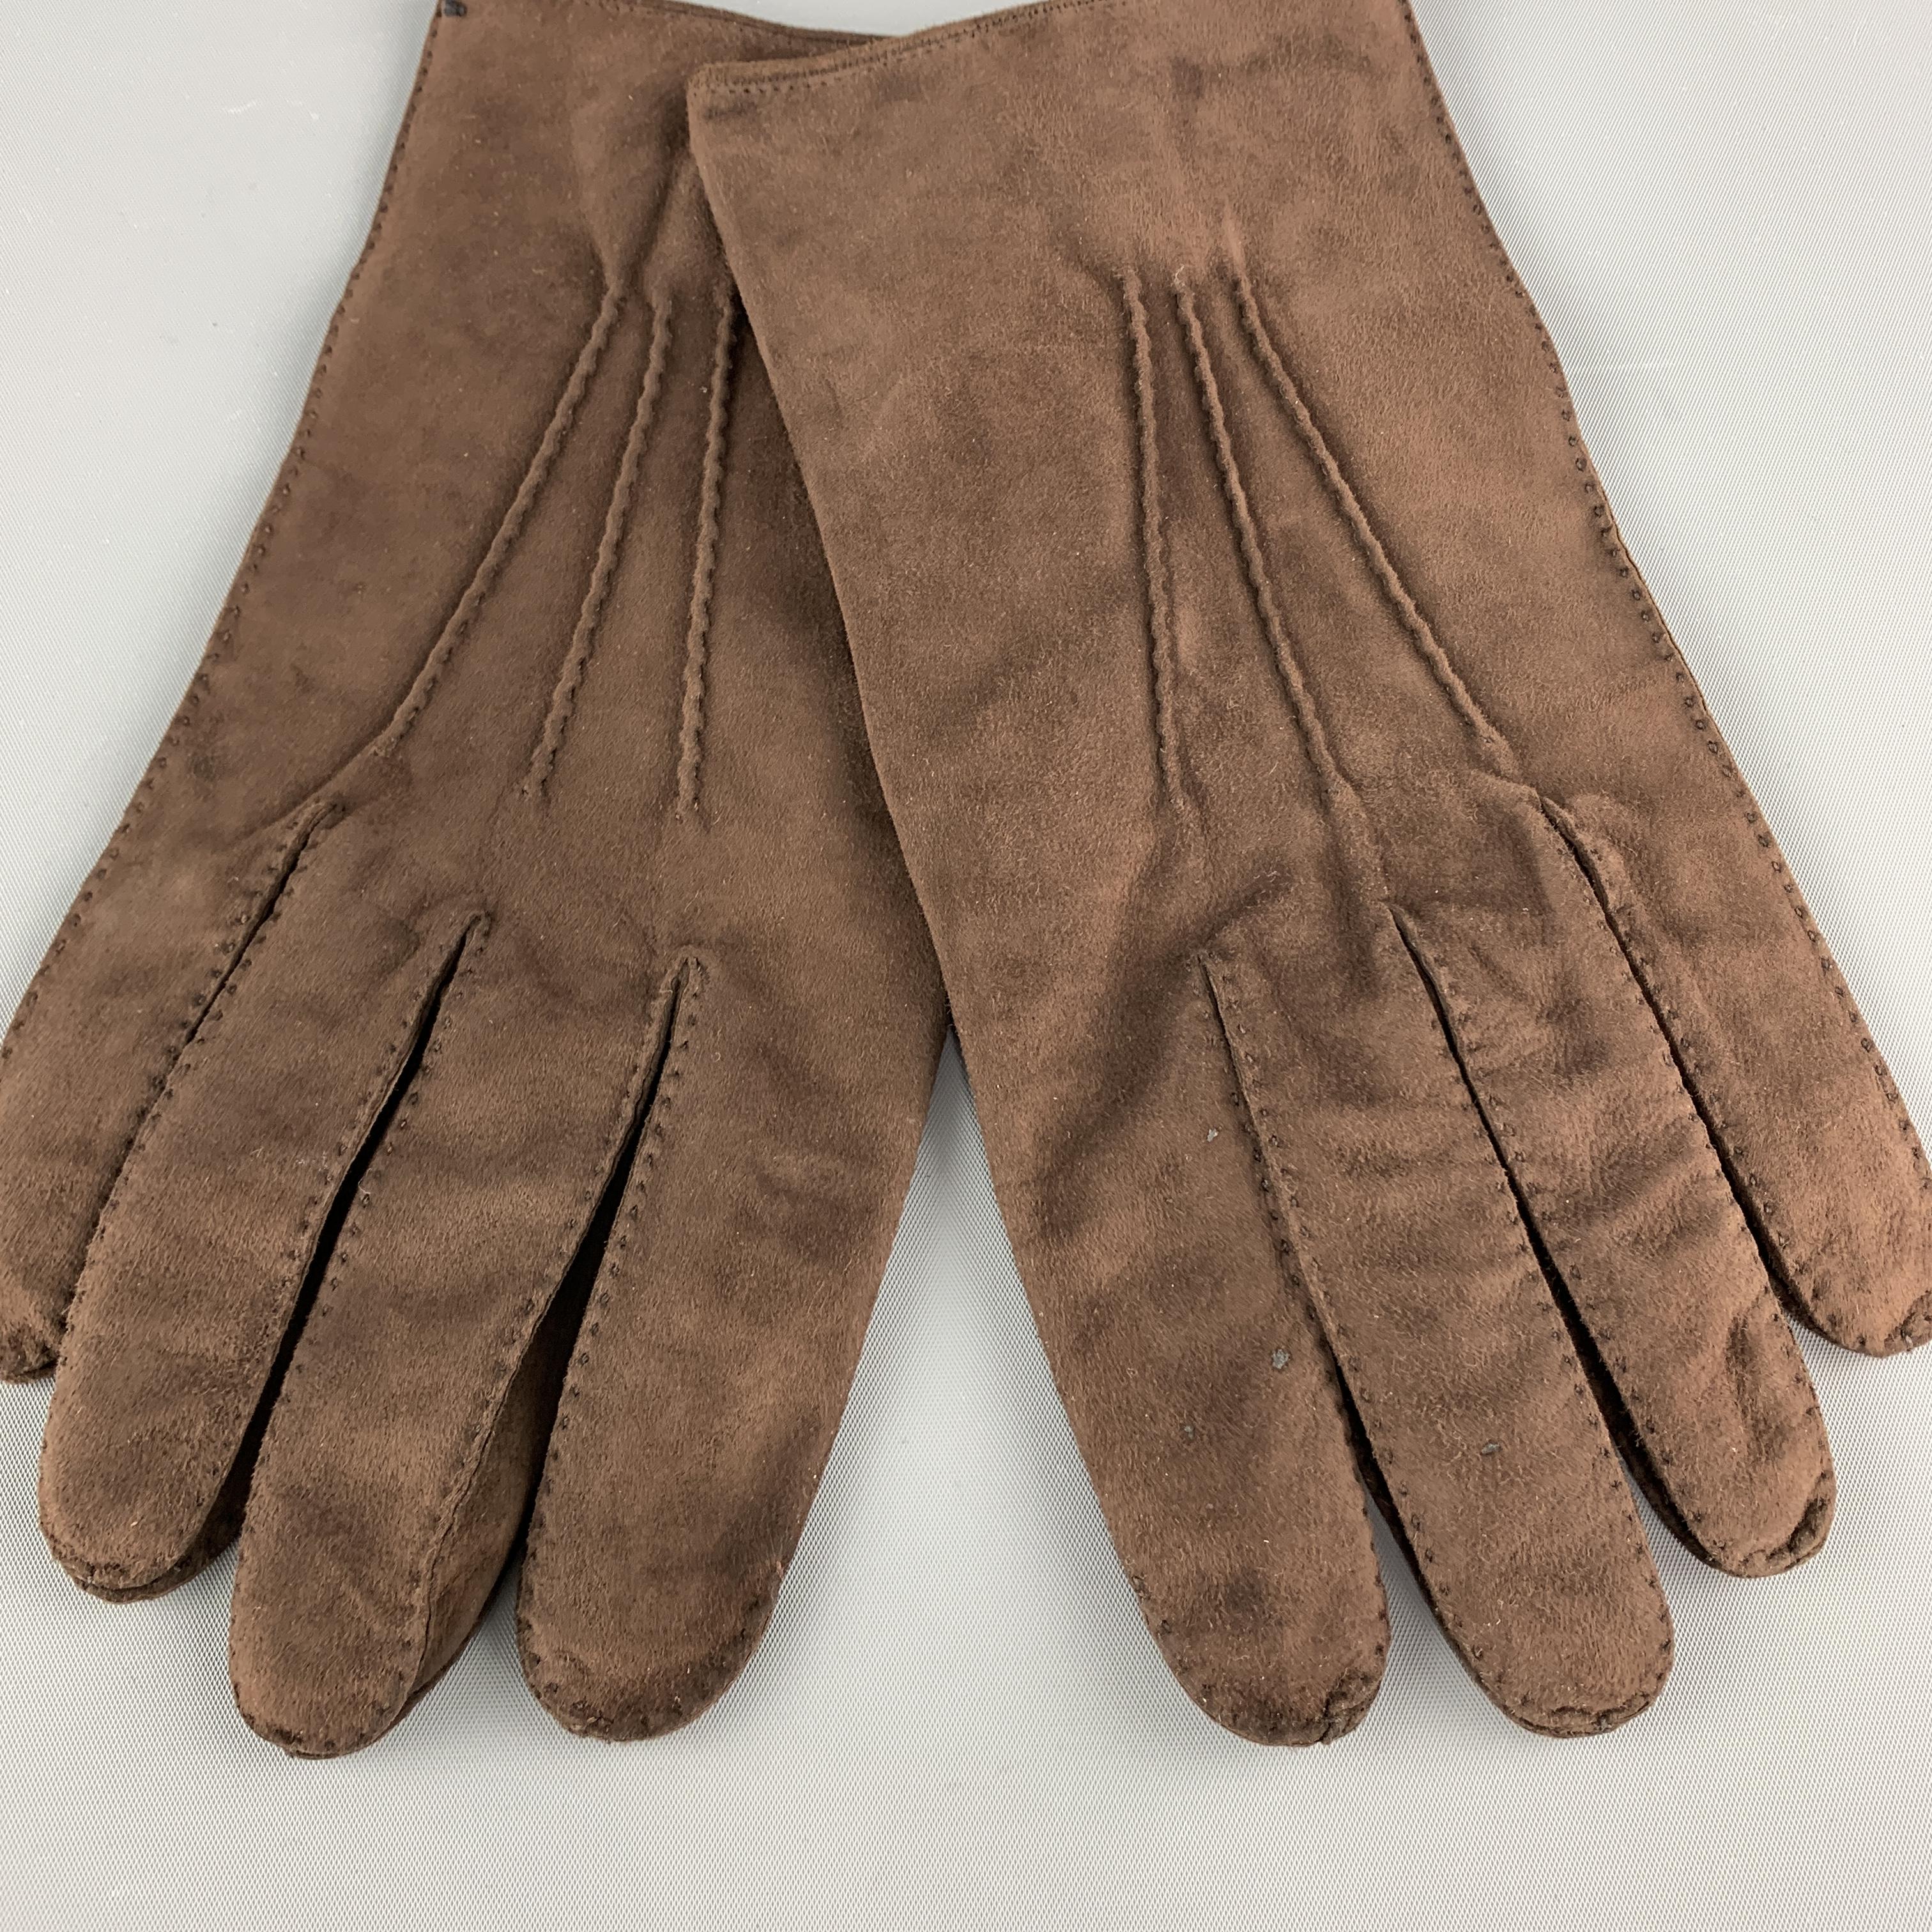 MADOVA gloves come in brown suede with top stitching. With bag. Made in Italy.

Very Good Pre-Owned Condition.
Marked: 9 1/2

Length: 10 in.
Width: 4.5 in.
